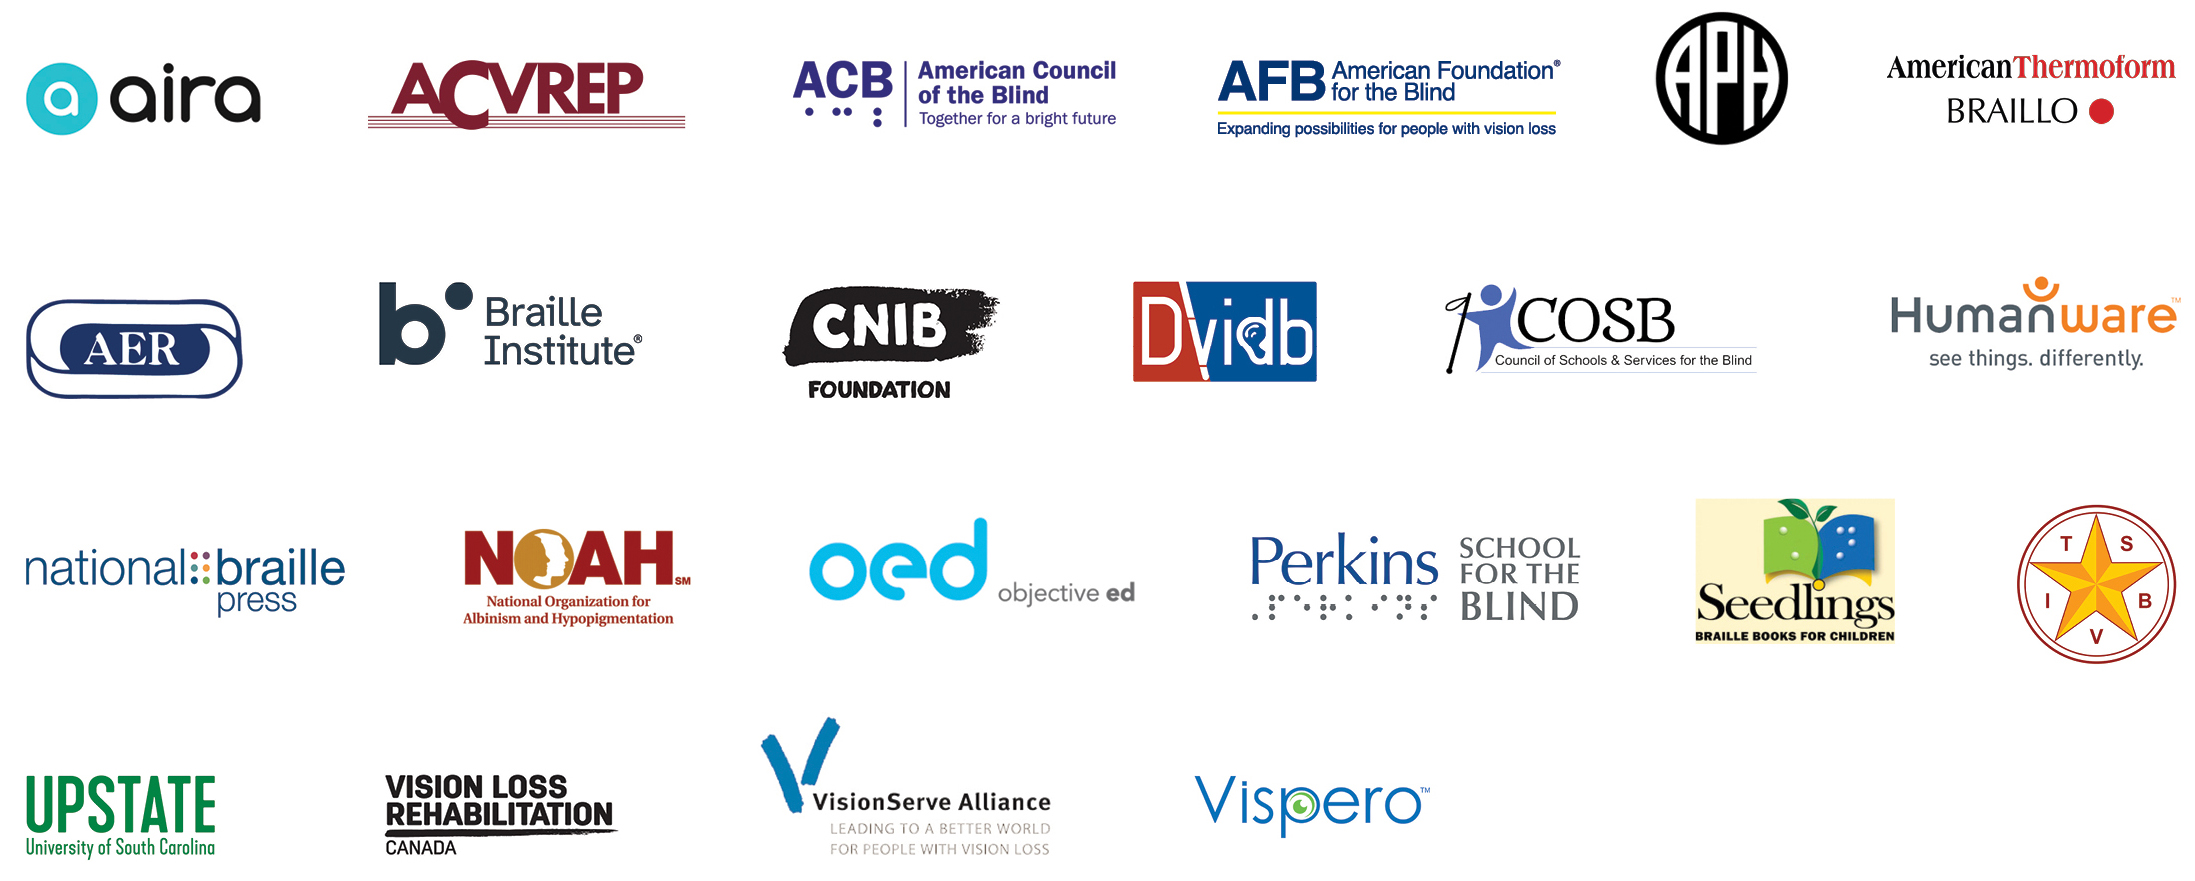 An array of company logos for the organizations that collaborated on this report: Aira, ACVREP, American Council of the Blind, American Foundation for the Blind, APH, American Thermoform, Braillo, AER, Braille Institute, CNIB Foundation, DVIDB, COSB, Humanware, National Braille Press, NOAH, OED, Perkins School for the Blind, Seedlings Braille Books for Children, TSBVI, Upstate University of South Carolina, Vision Loss Rehabilitation Canada, VisionServe Alliance, and Vispero. 